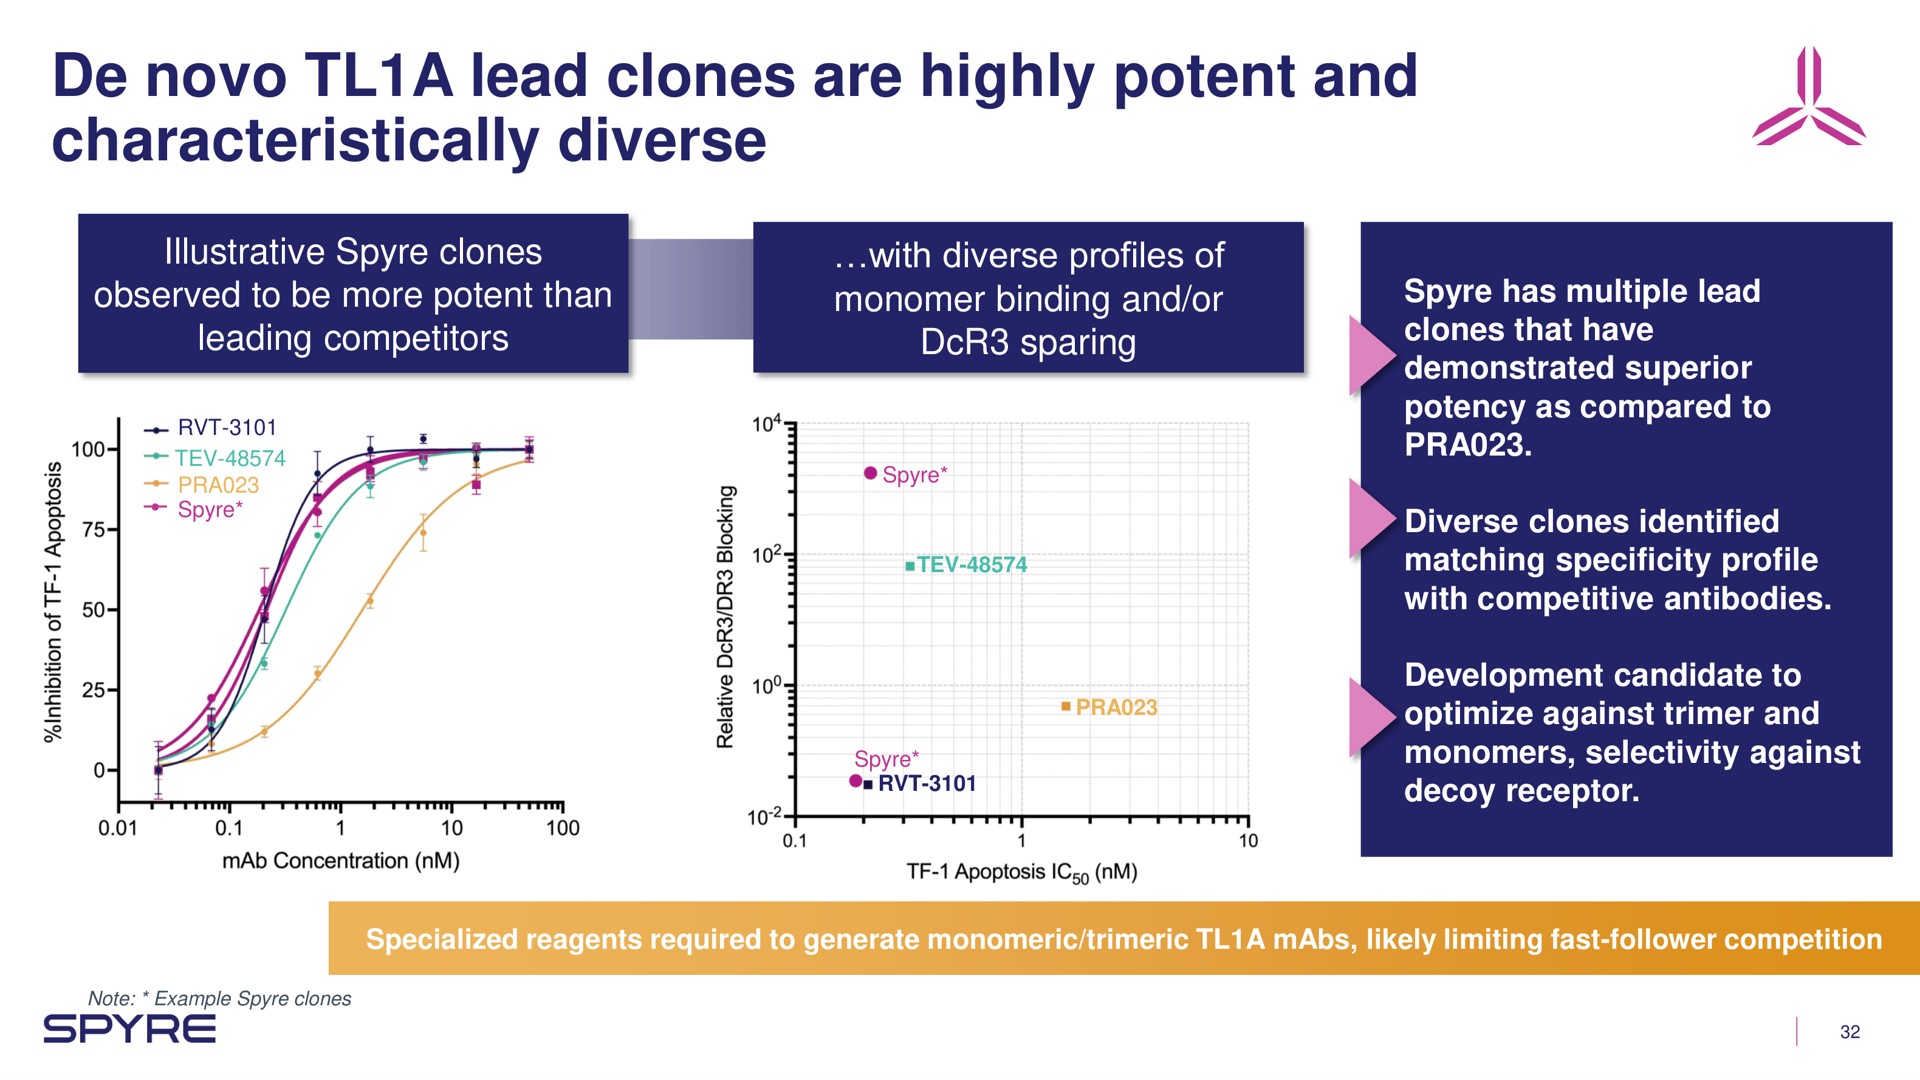 a lead clones are highly potent and characteristically diverse | Aeglea BioTherapeutics